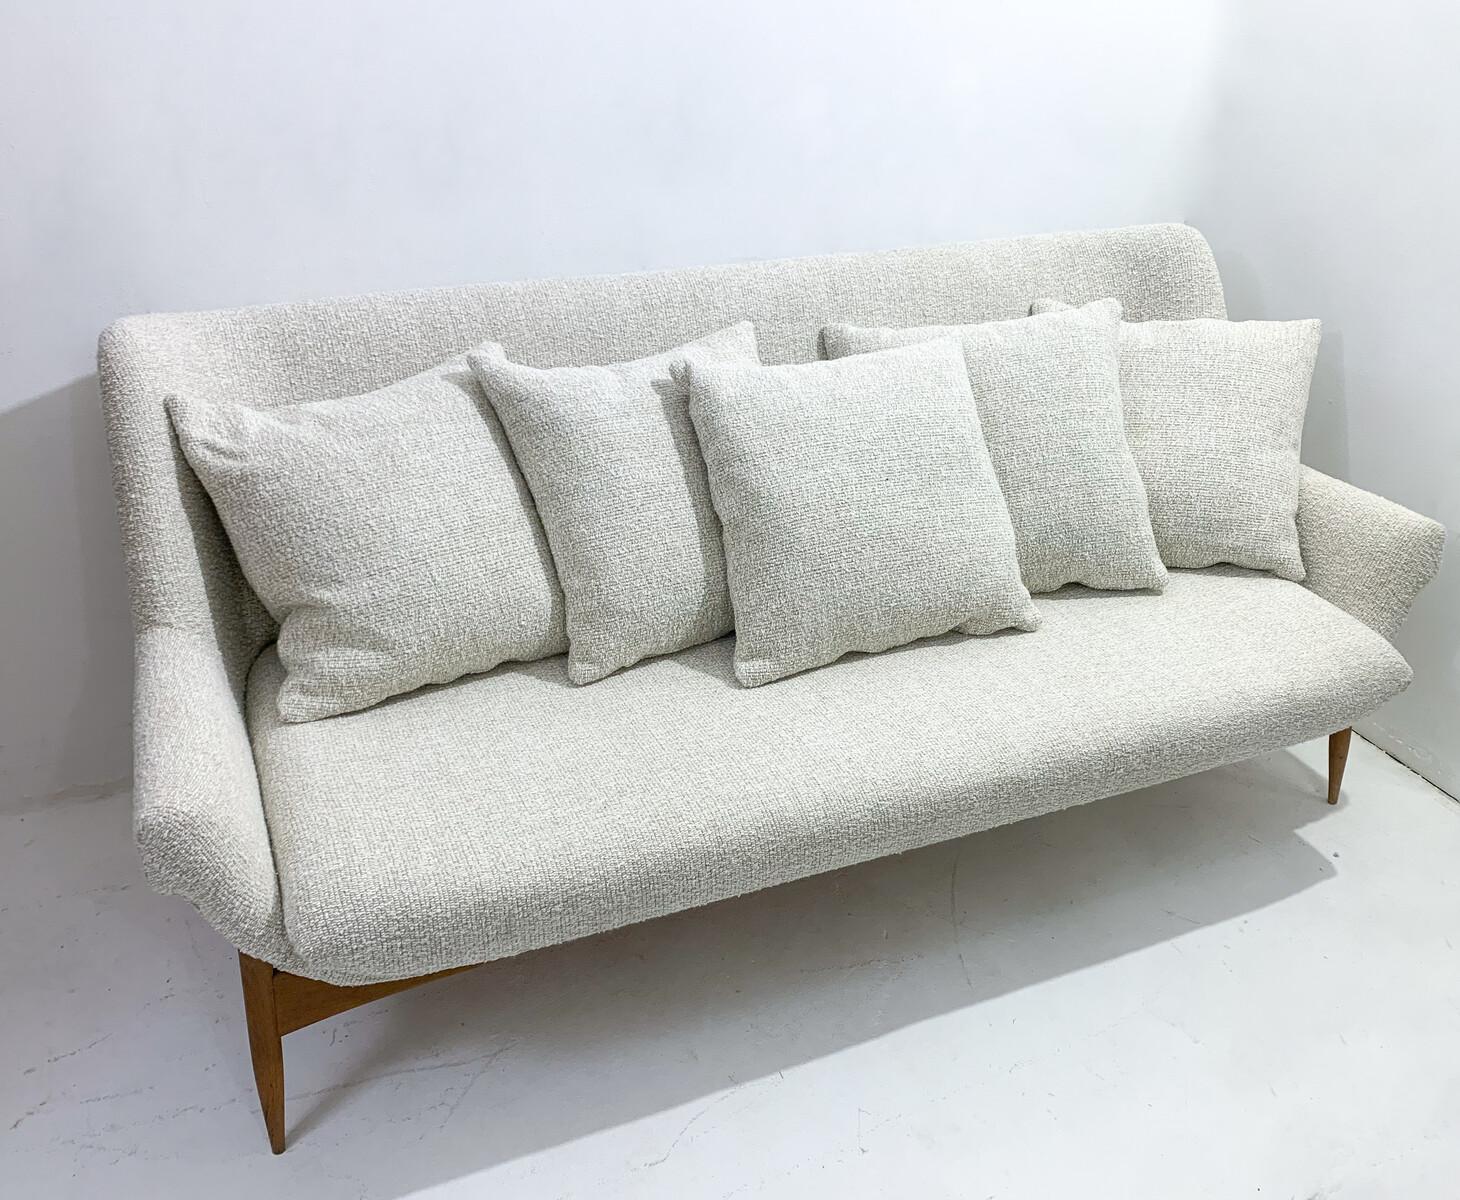 Mid-Century Modern Sofa by Julia Gaubek, Beige Upholstery, Hungary, 1950s In Good Condition For Sale In Brussels, BE